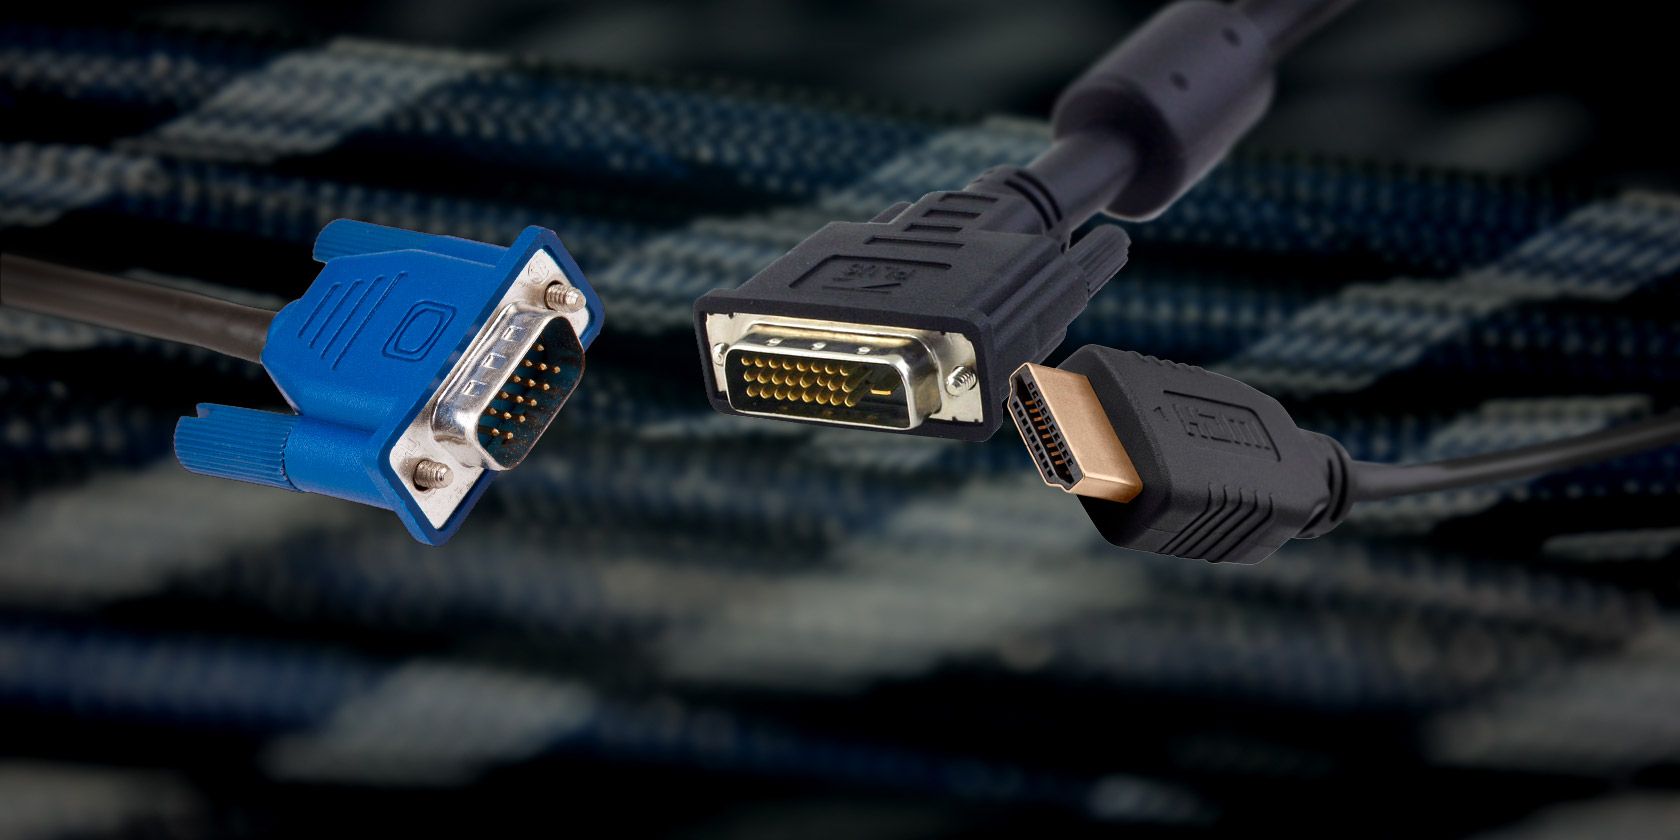 Cable Types Explained: DVI, and HDMI Ports